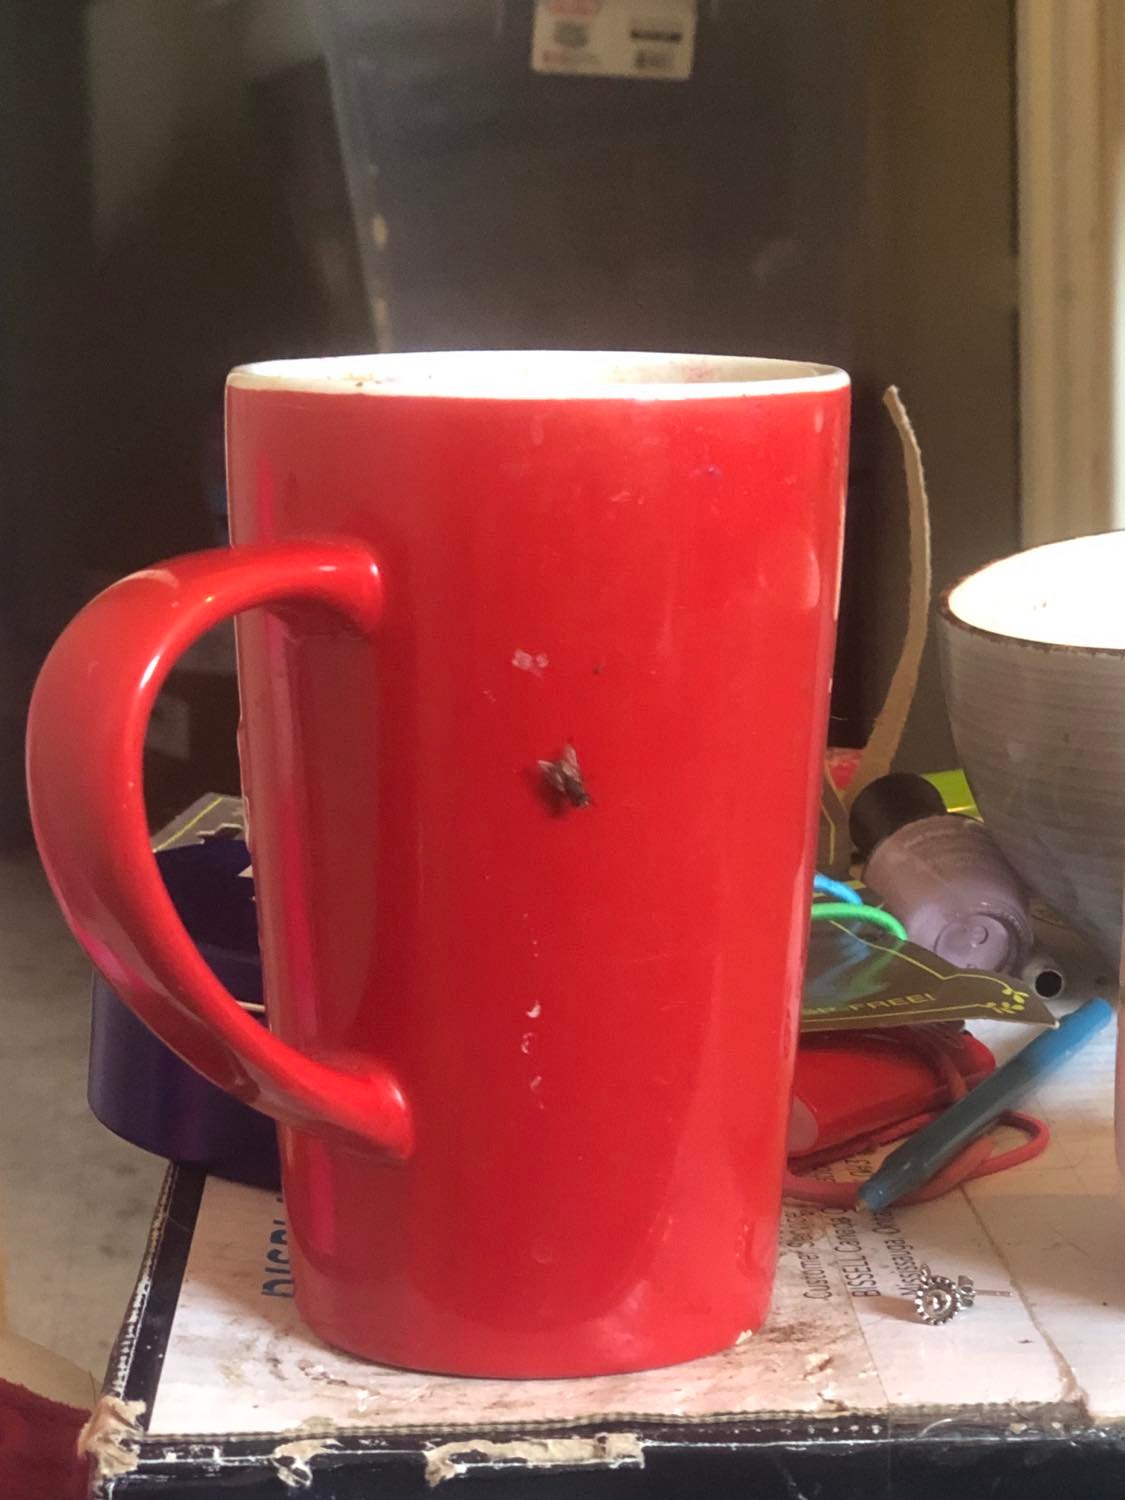 A housefly sharing my coffee, sitting on the outside of my red coffee mug and eating the sugar traces on the side.